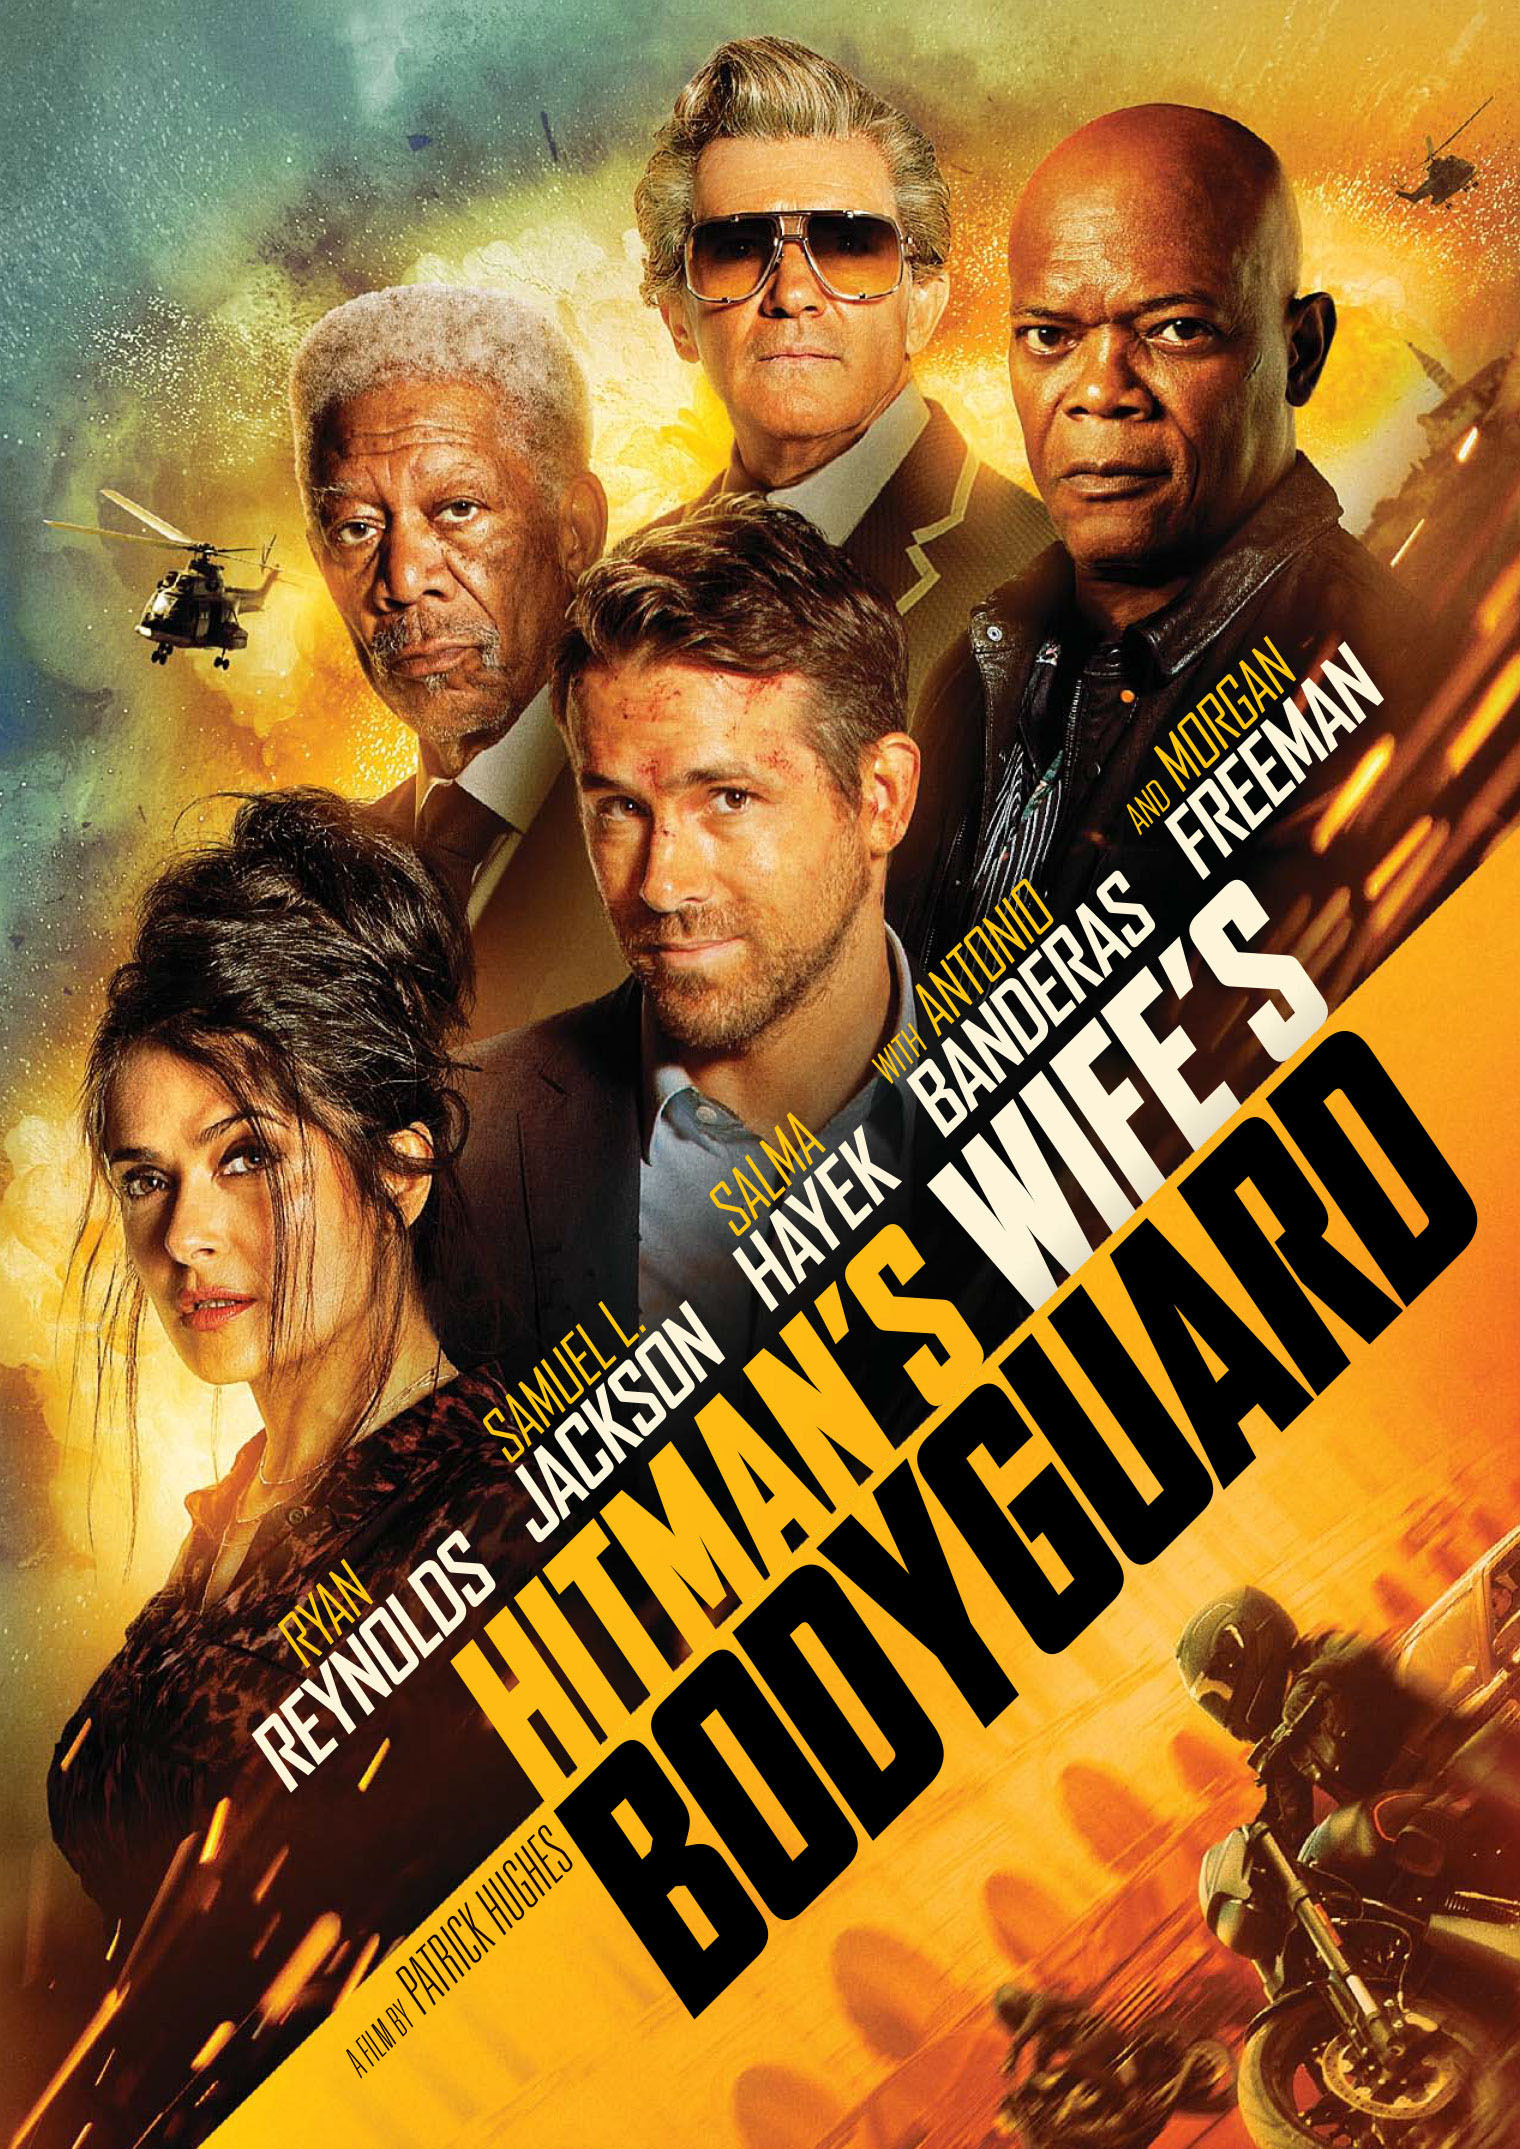 The Hitman's Wife's Bodyguard - DVD [ 2021 ]  - Action Movies On DVD - Movies On GRUV